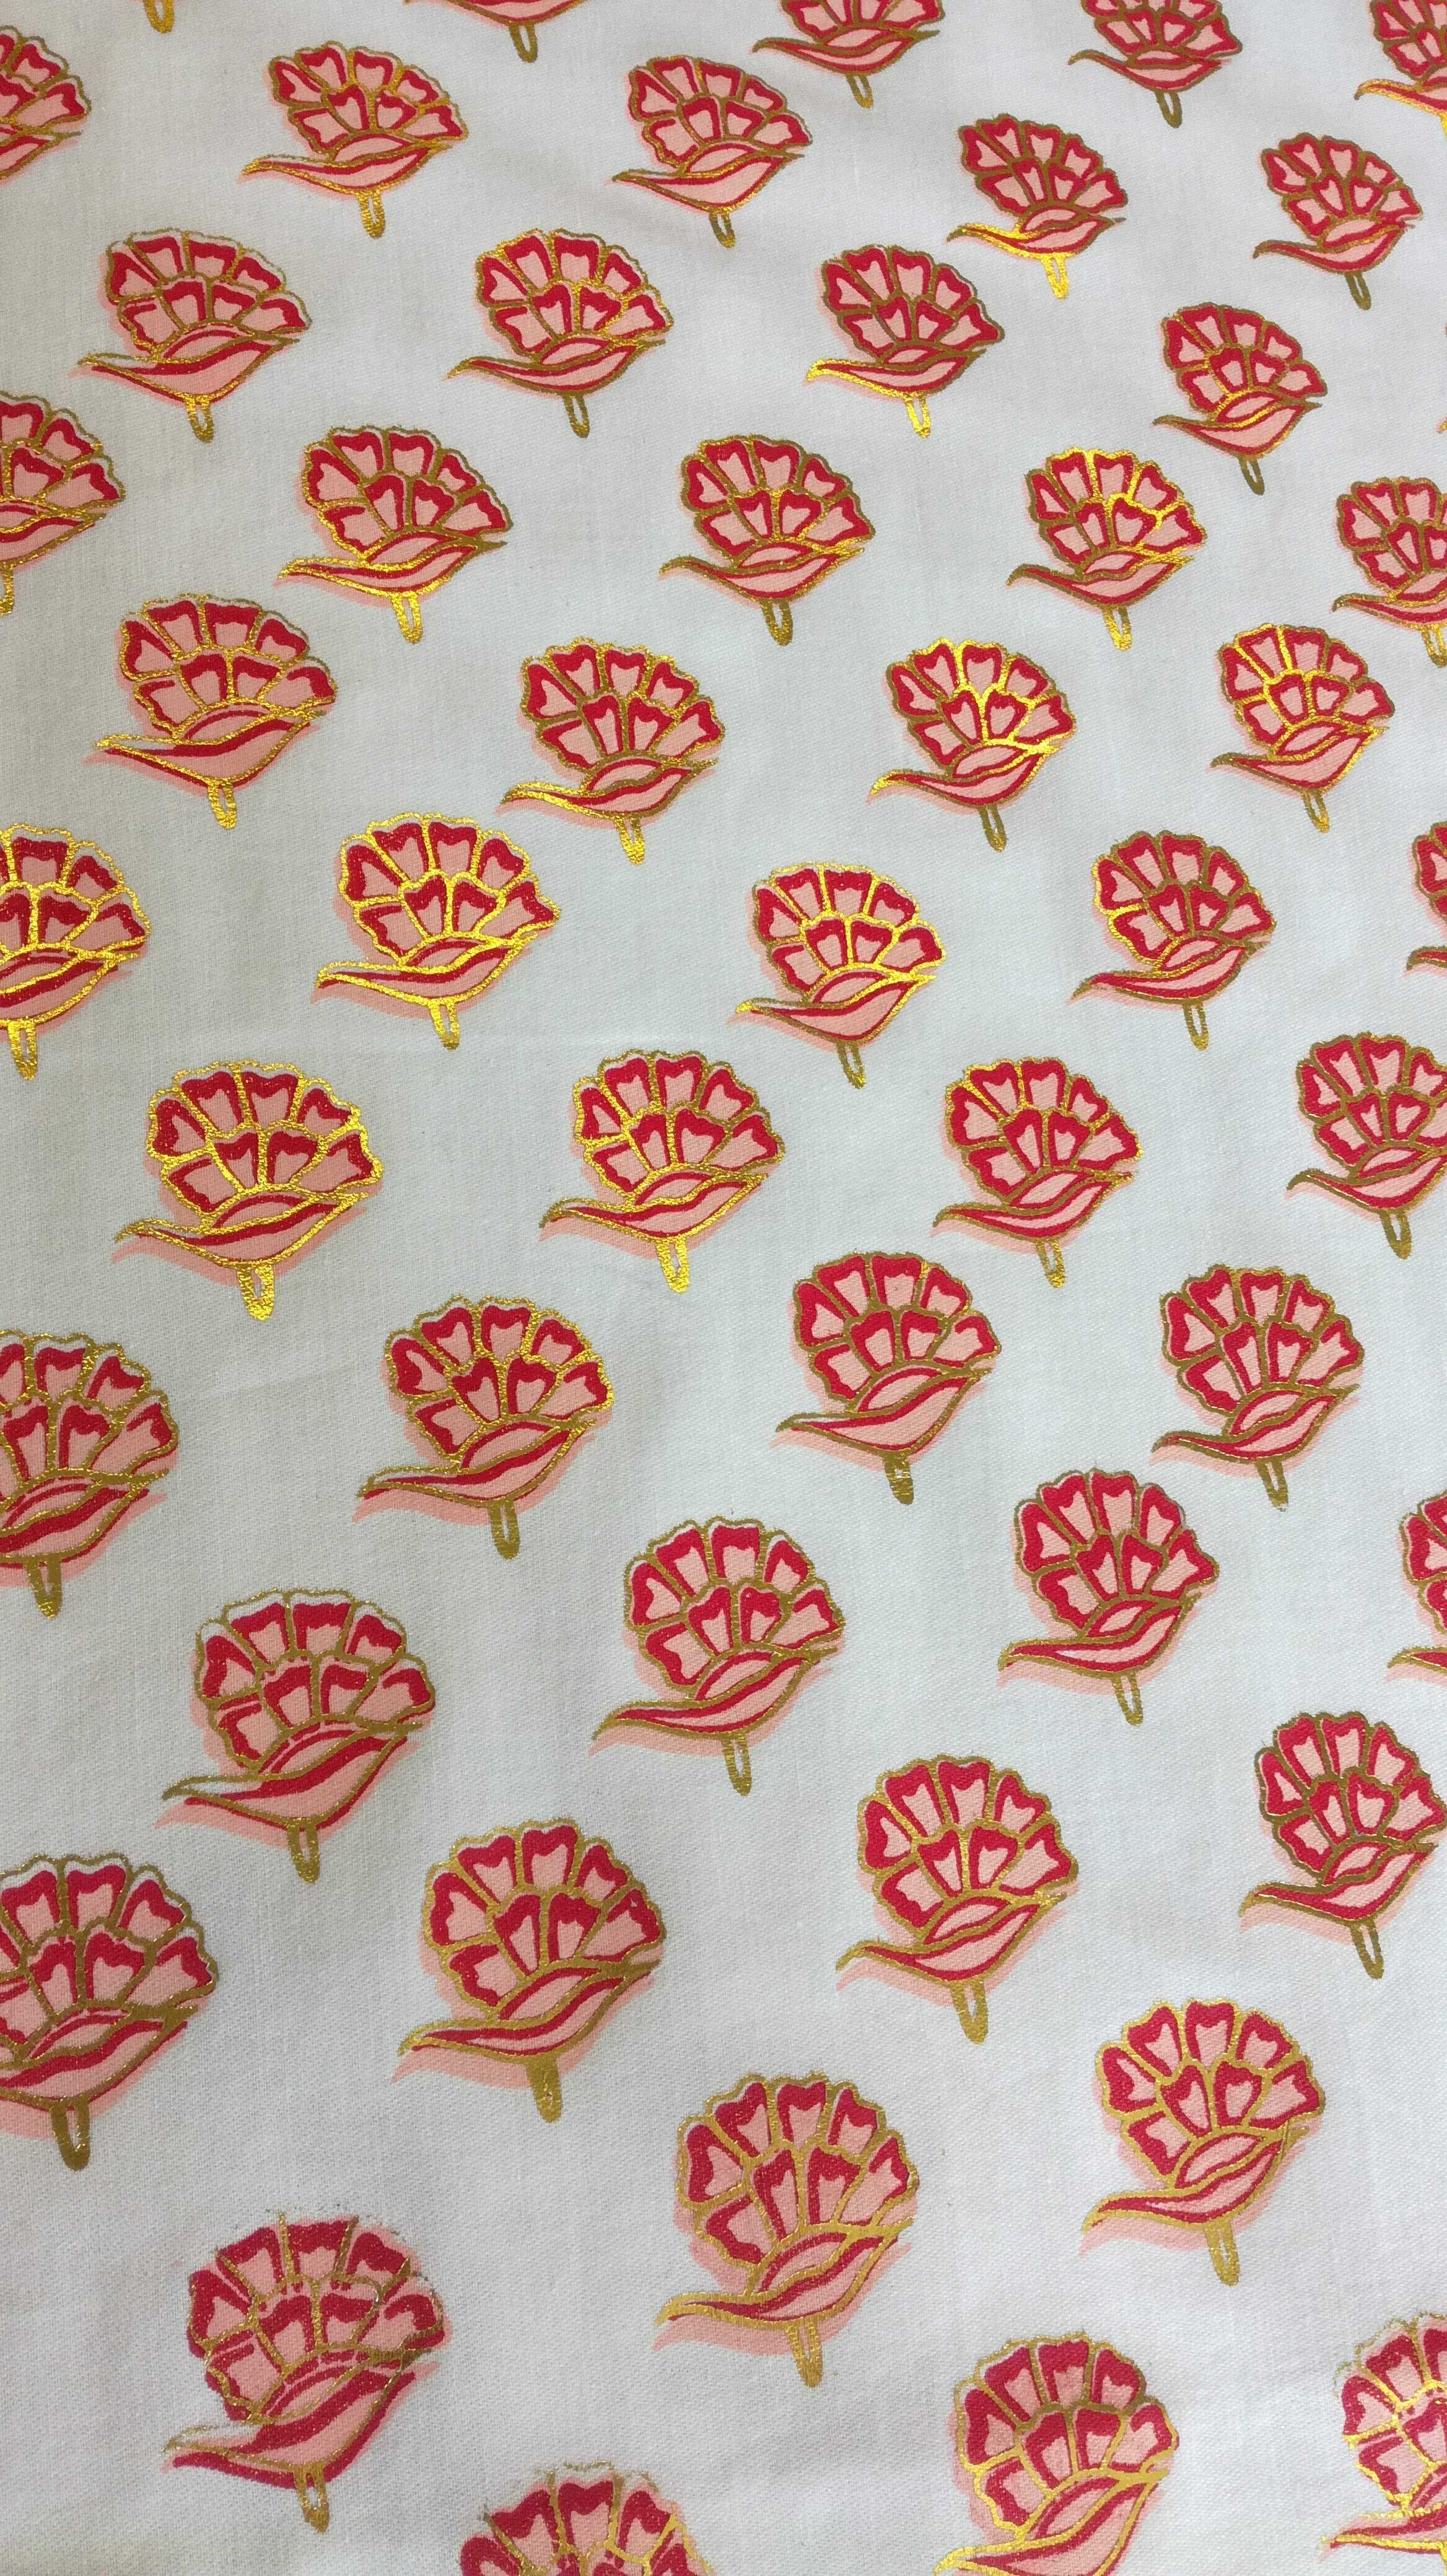 Finished fabric. 3 layer screenprint with gold foil. 15m of fabric was screenprinted.